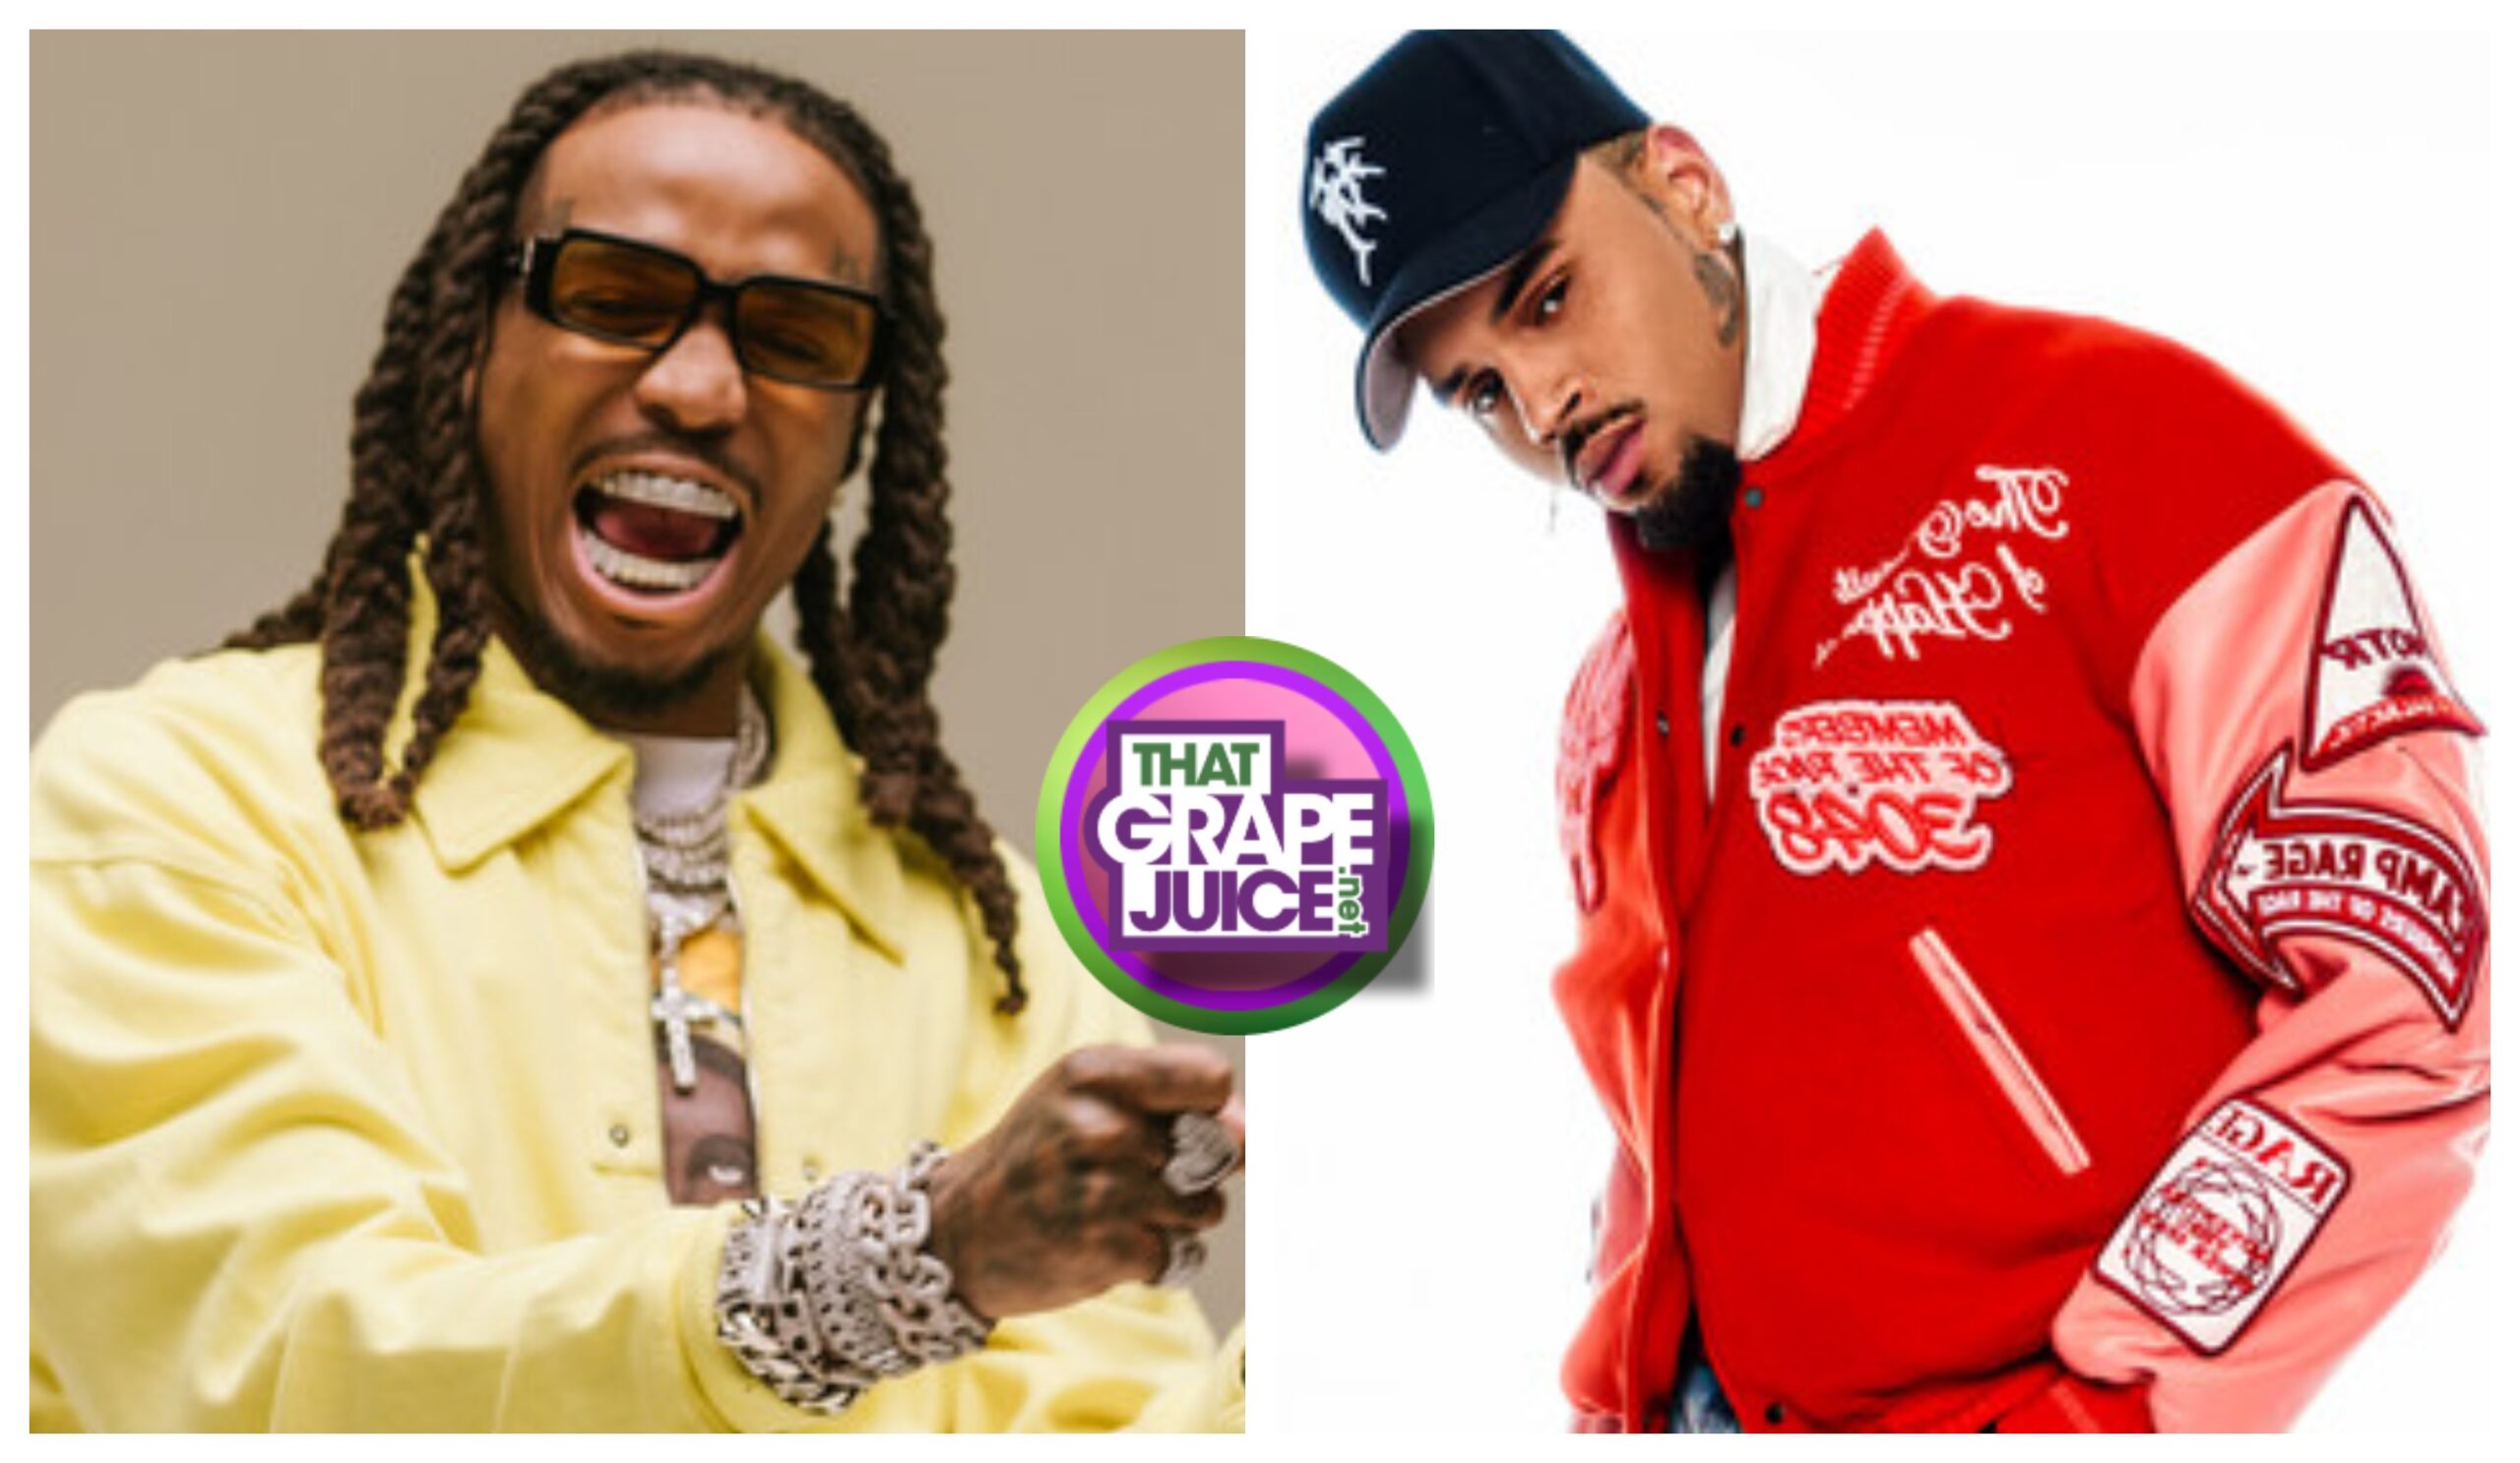 Listen: Quavo Blasts Chris Brown on Clap Back Diss Track, Raps “You Been F*cked Up Your Bag When You Punched Rih in the Face”